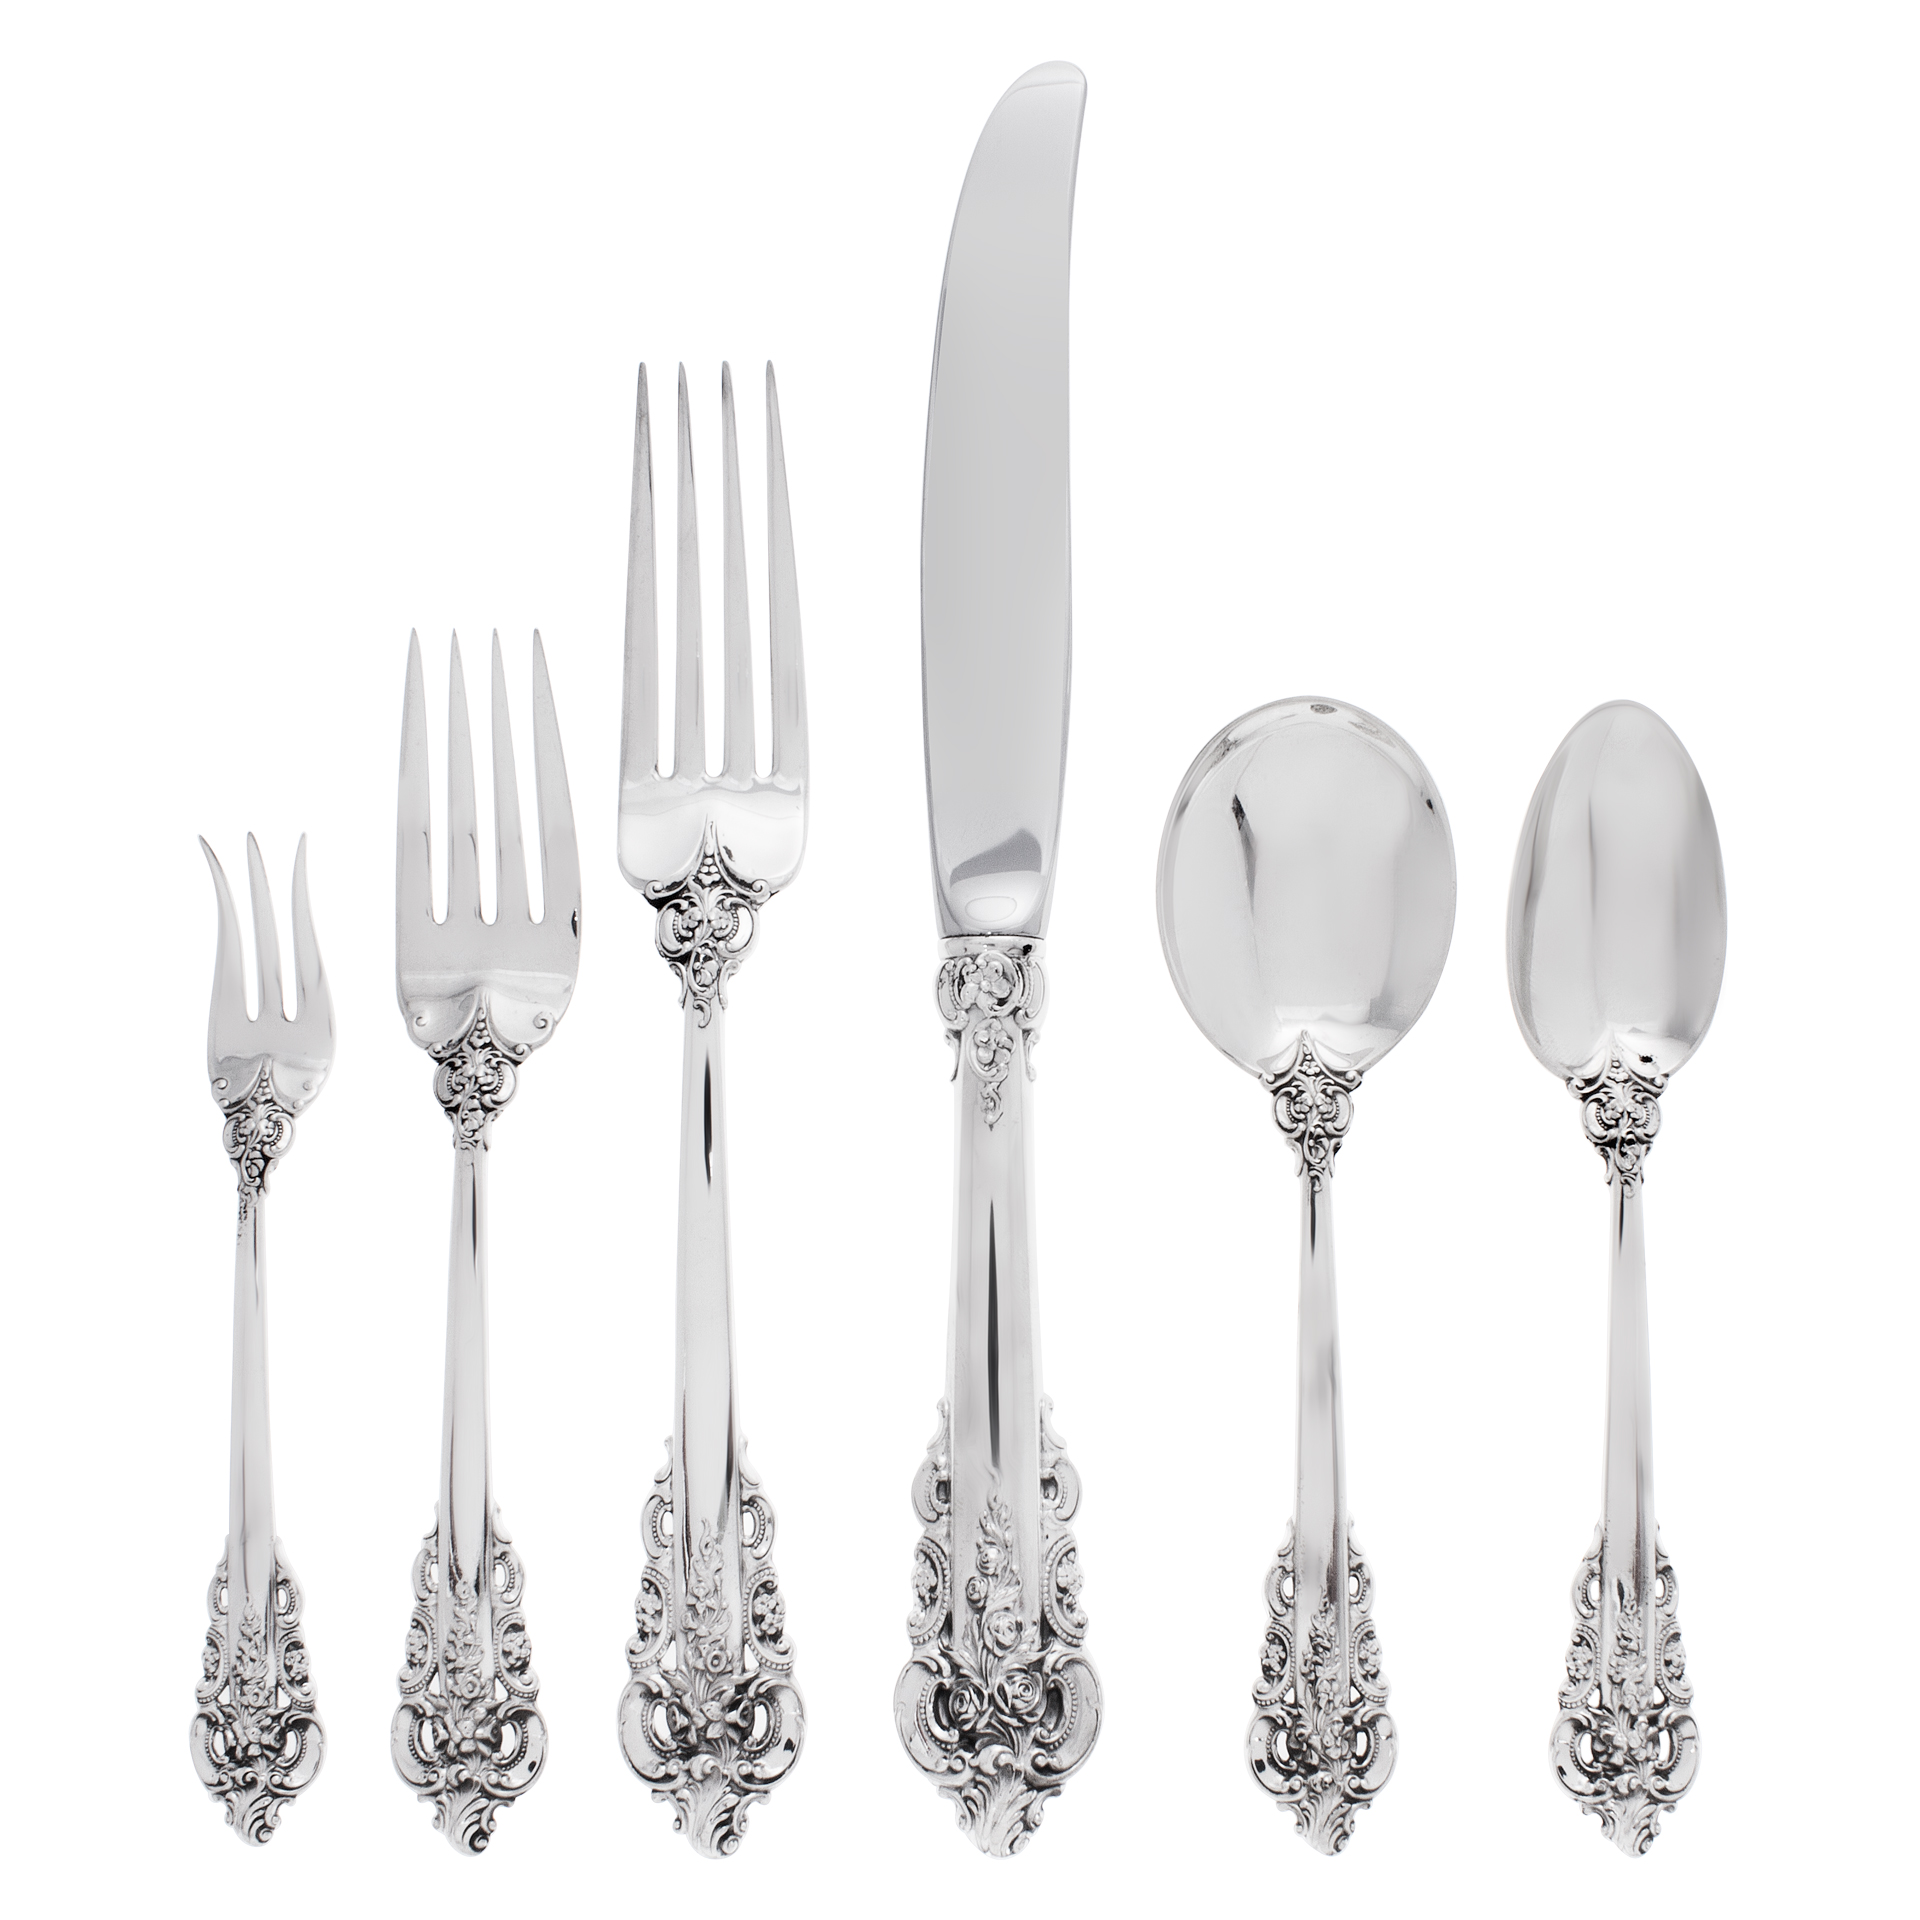 "GRANDE BAROQUE" Sterling Silver Flatware Set by Wallace, patented in 1941. 6 place setting for 12 with 3 Serving pieces. 75 pieces total- Over 3300 grams of Sterling Silver image 1